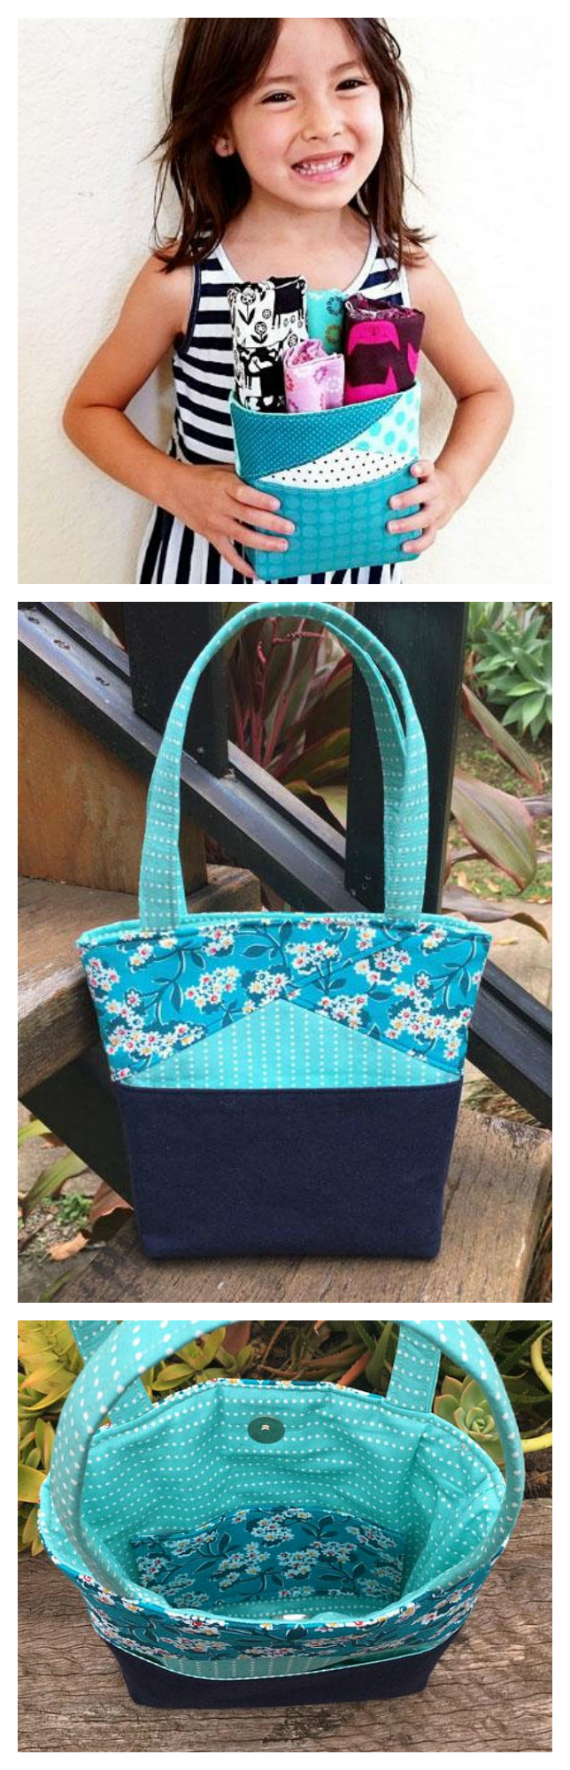 Here's a great pattern for a beginner sewer, for a quick and easy sew, to make you this adorable Stand Up Clutch bag. And the great news is the Stand Up Clutch comes in three sizes (small, medium and large) which enables you to make a clutch to suit any and every occasion.